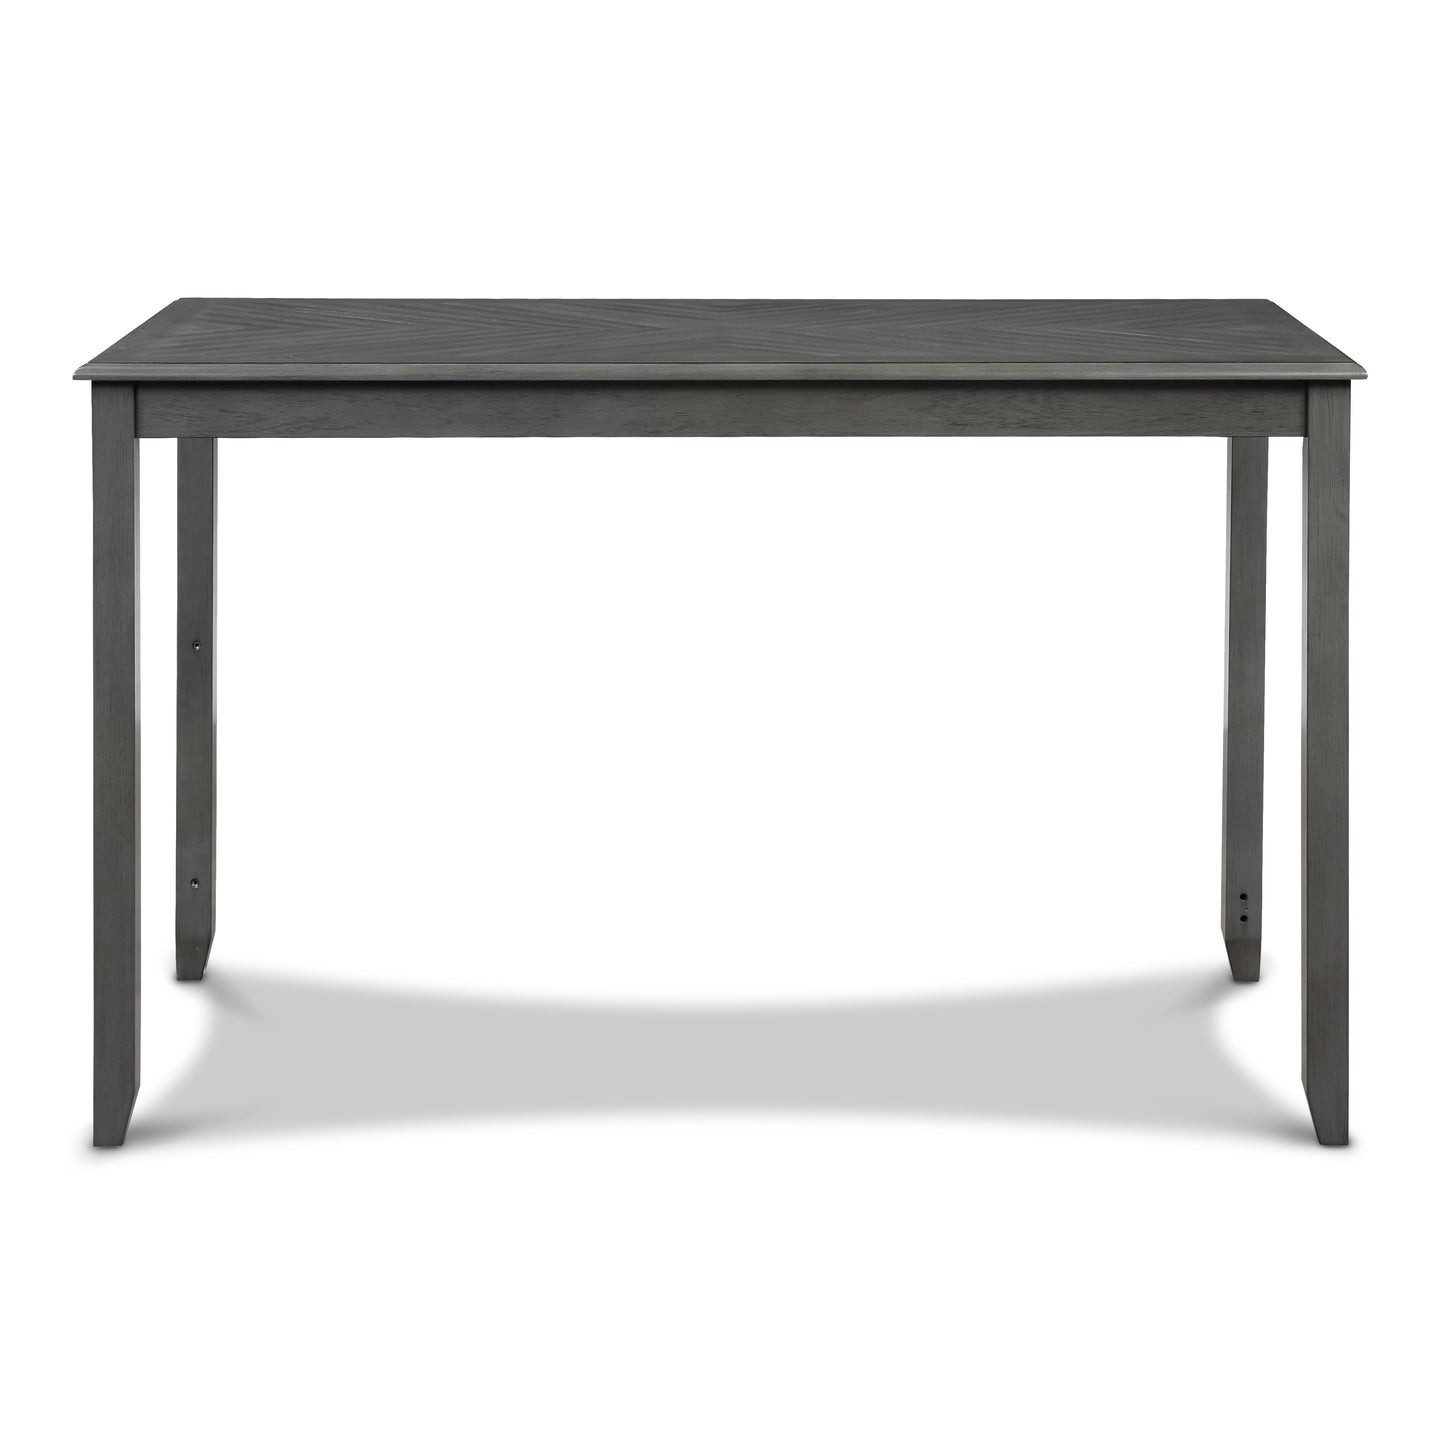 Amy - 60" Counter Table & Chairs With Storage